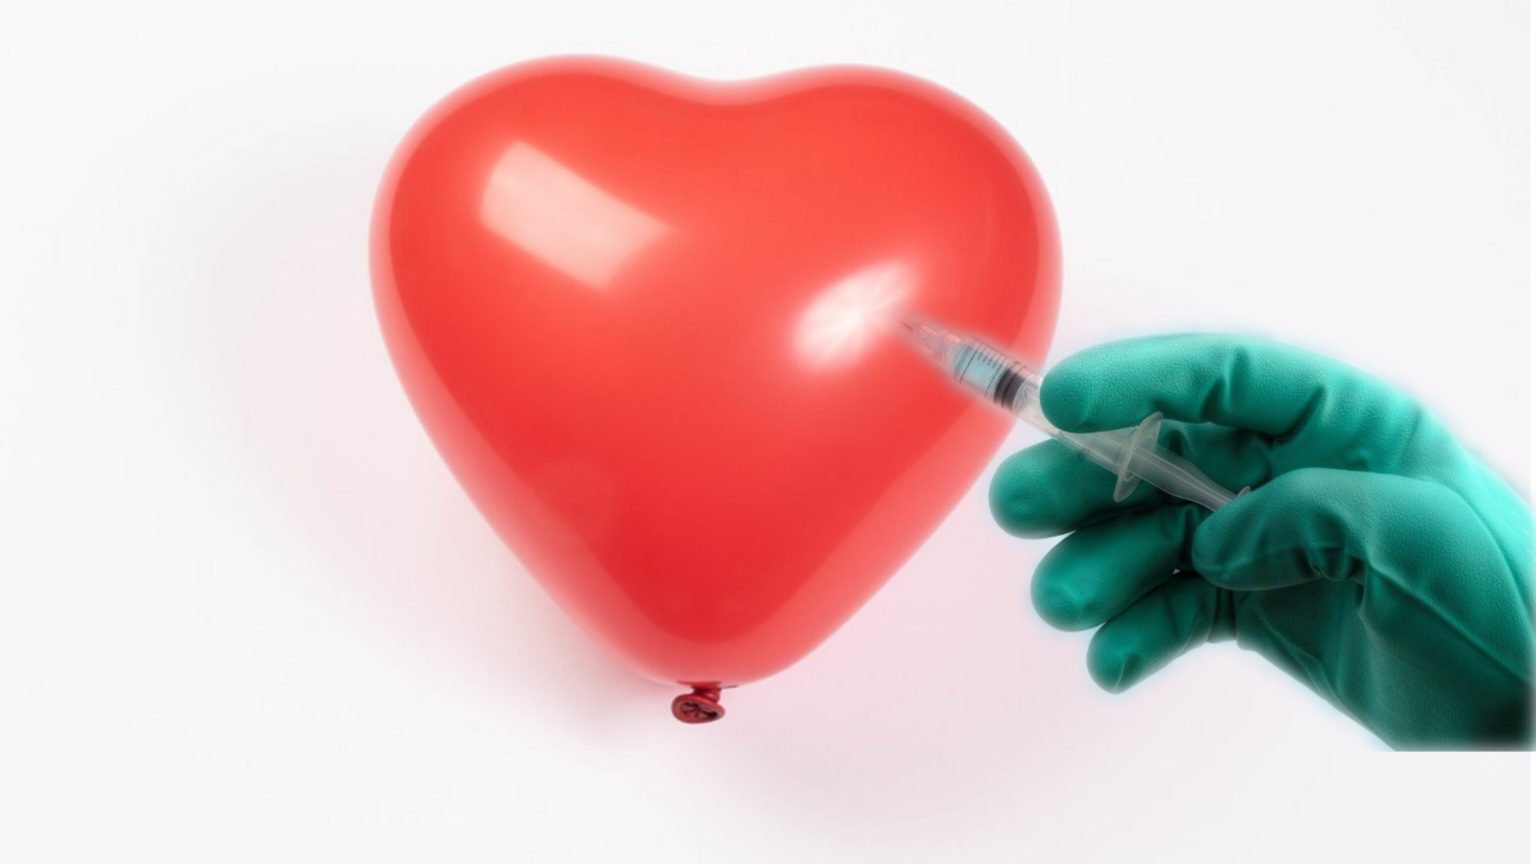 Can't Make This Up - Moderna CEO Announces Development of New mRNA "Injection" to Repair Heart Muscle After a Heart Attack | The Gateway Pundit | by Julian Conradson